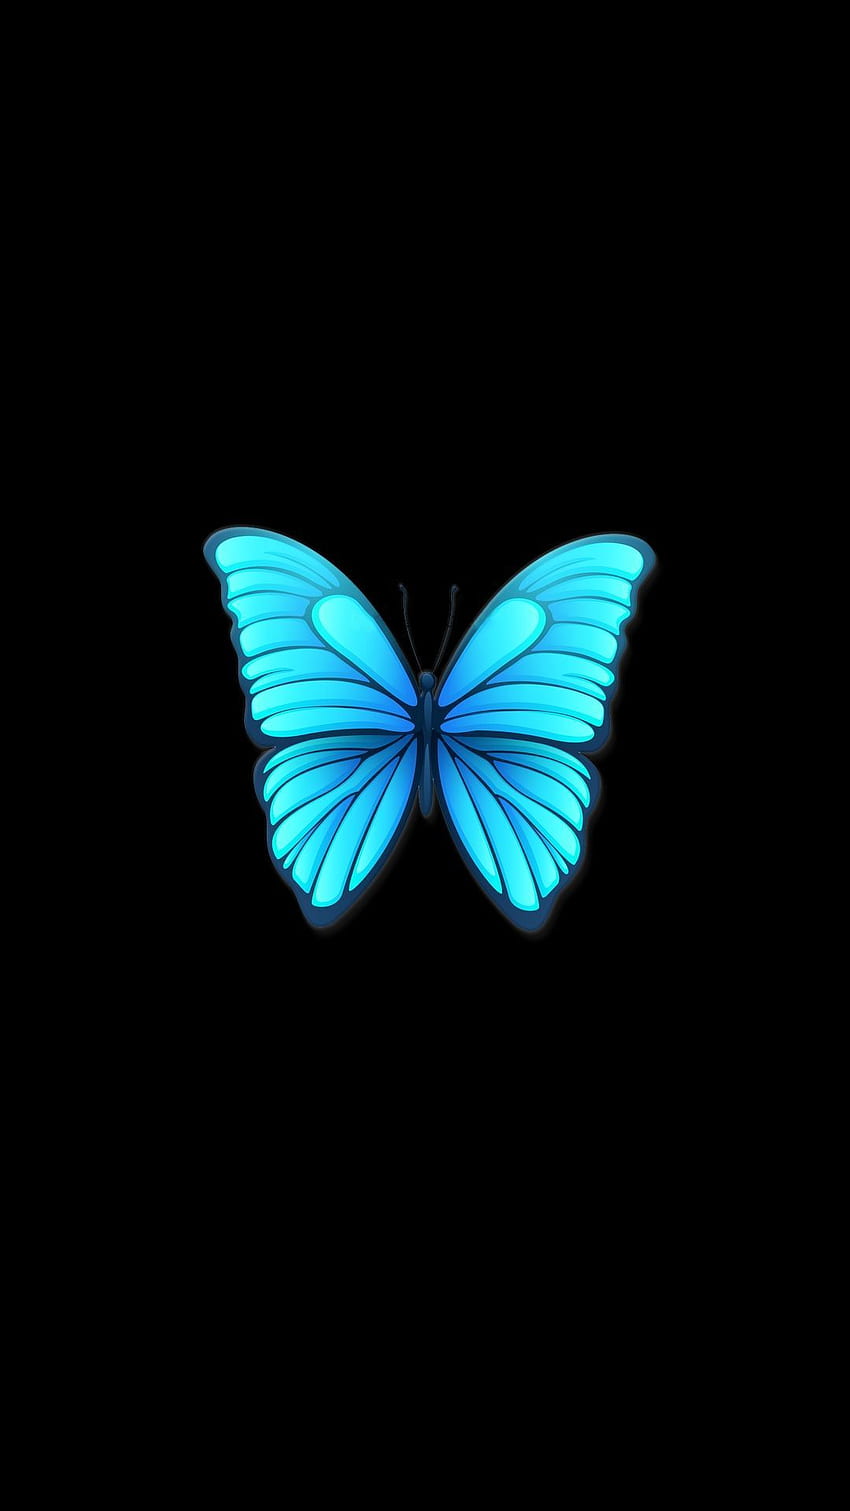 Amoled 14. Butterfly iphone, Butterfly , Teal and black HD phone ...